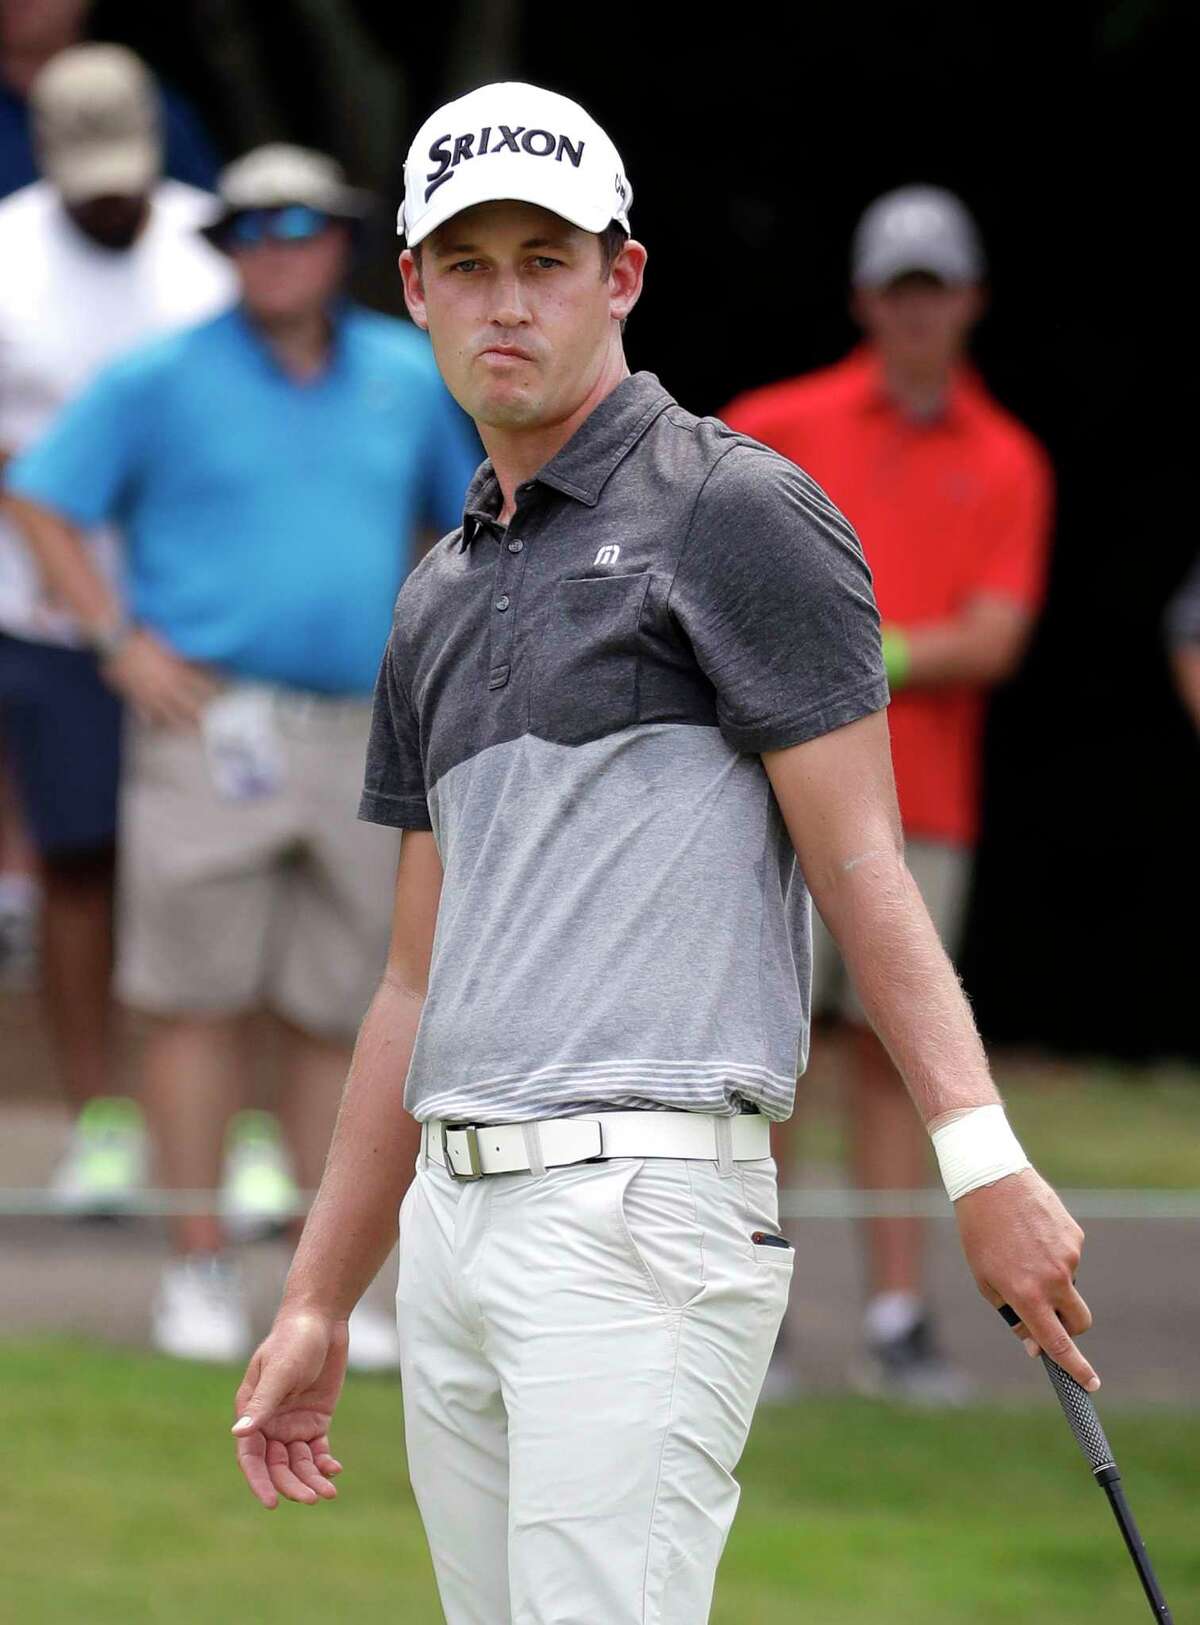 Andrew Putnam watches his birdie putt attempt on the seventh green during the third round of the St. Jude Classic golf tournament Saturday, June 9, 2018, in Memphis, Tenn. Putnam parred the hole. (AP Photo/Mark Humphrey)